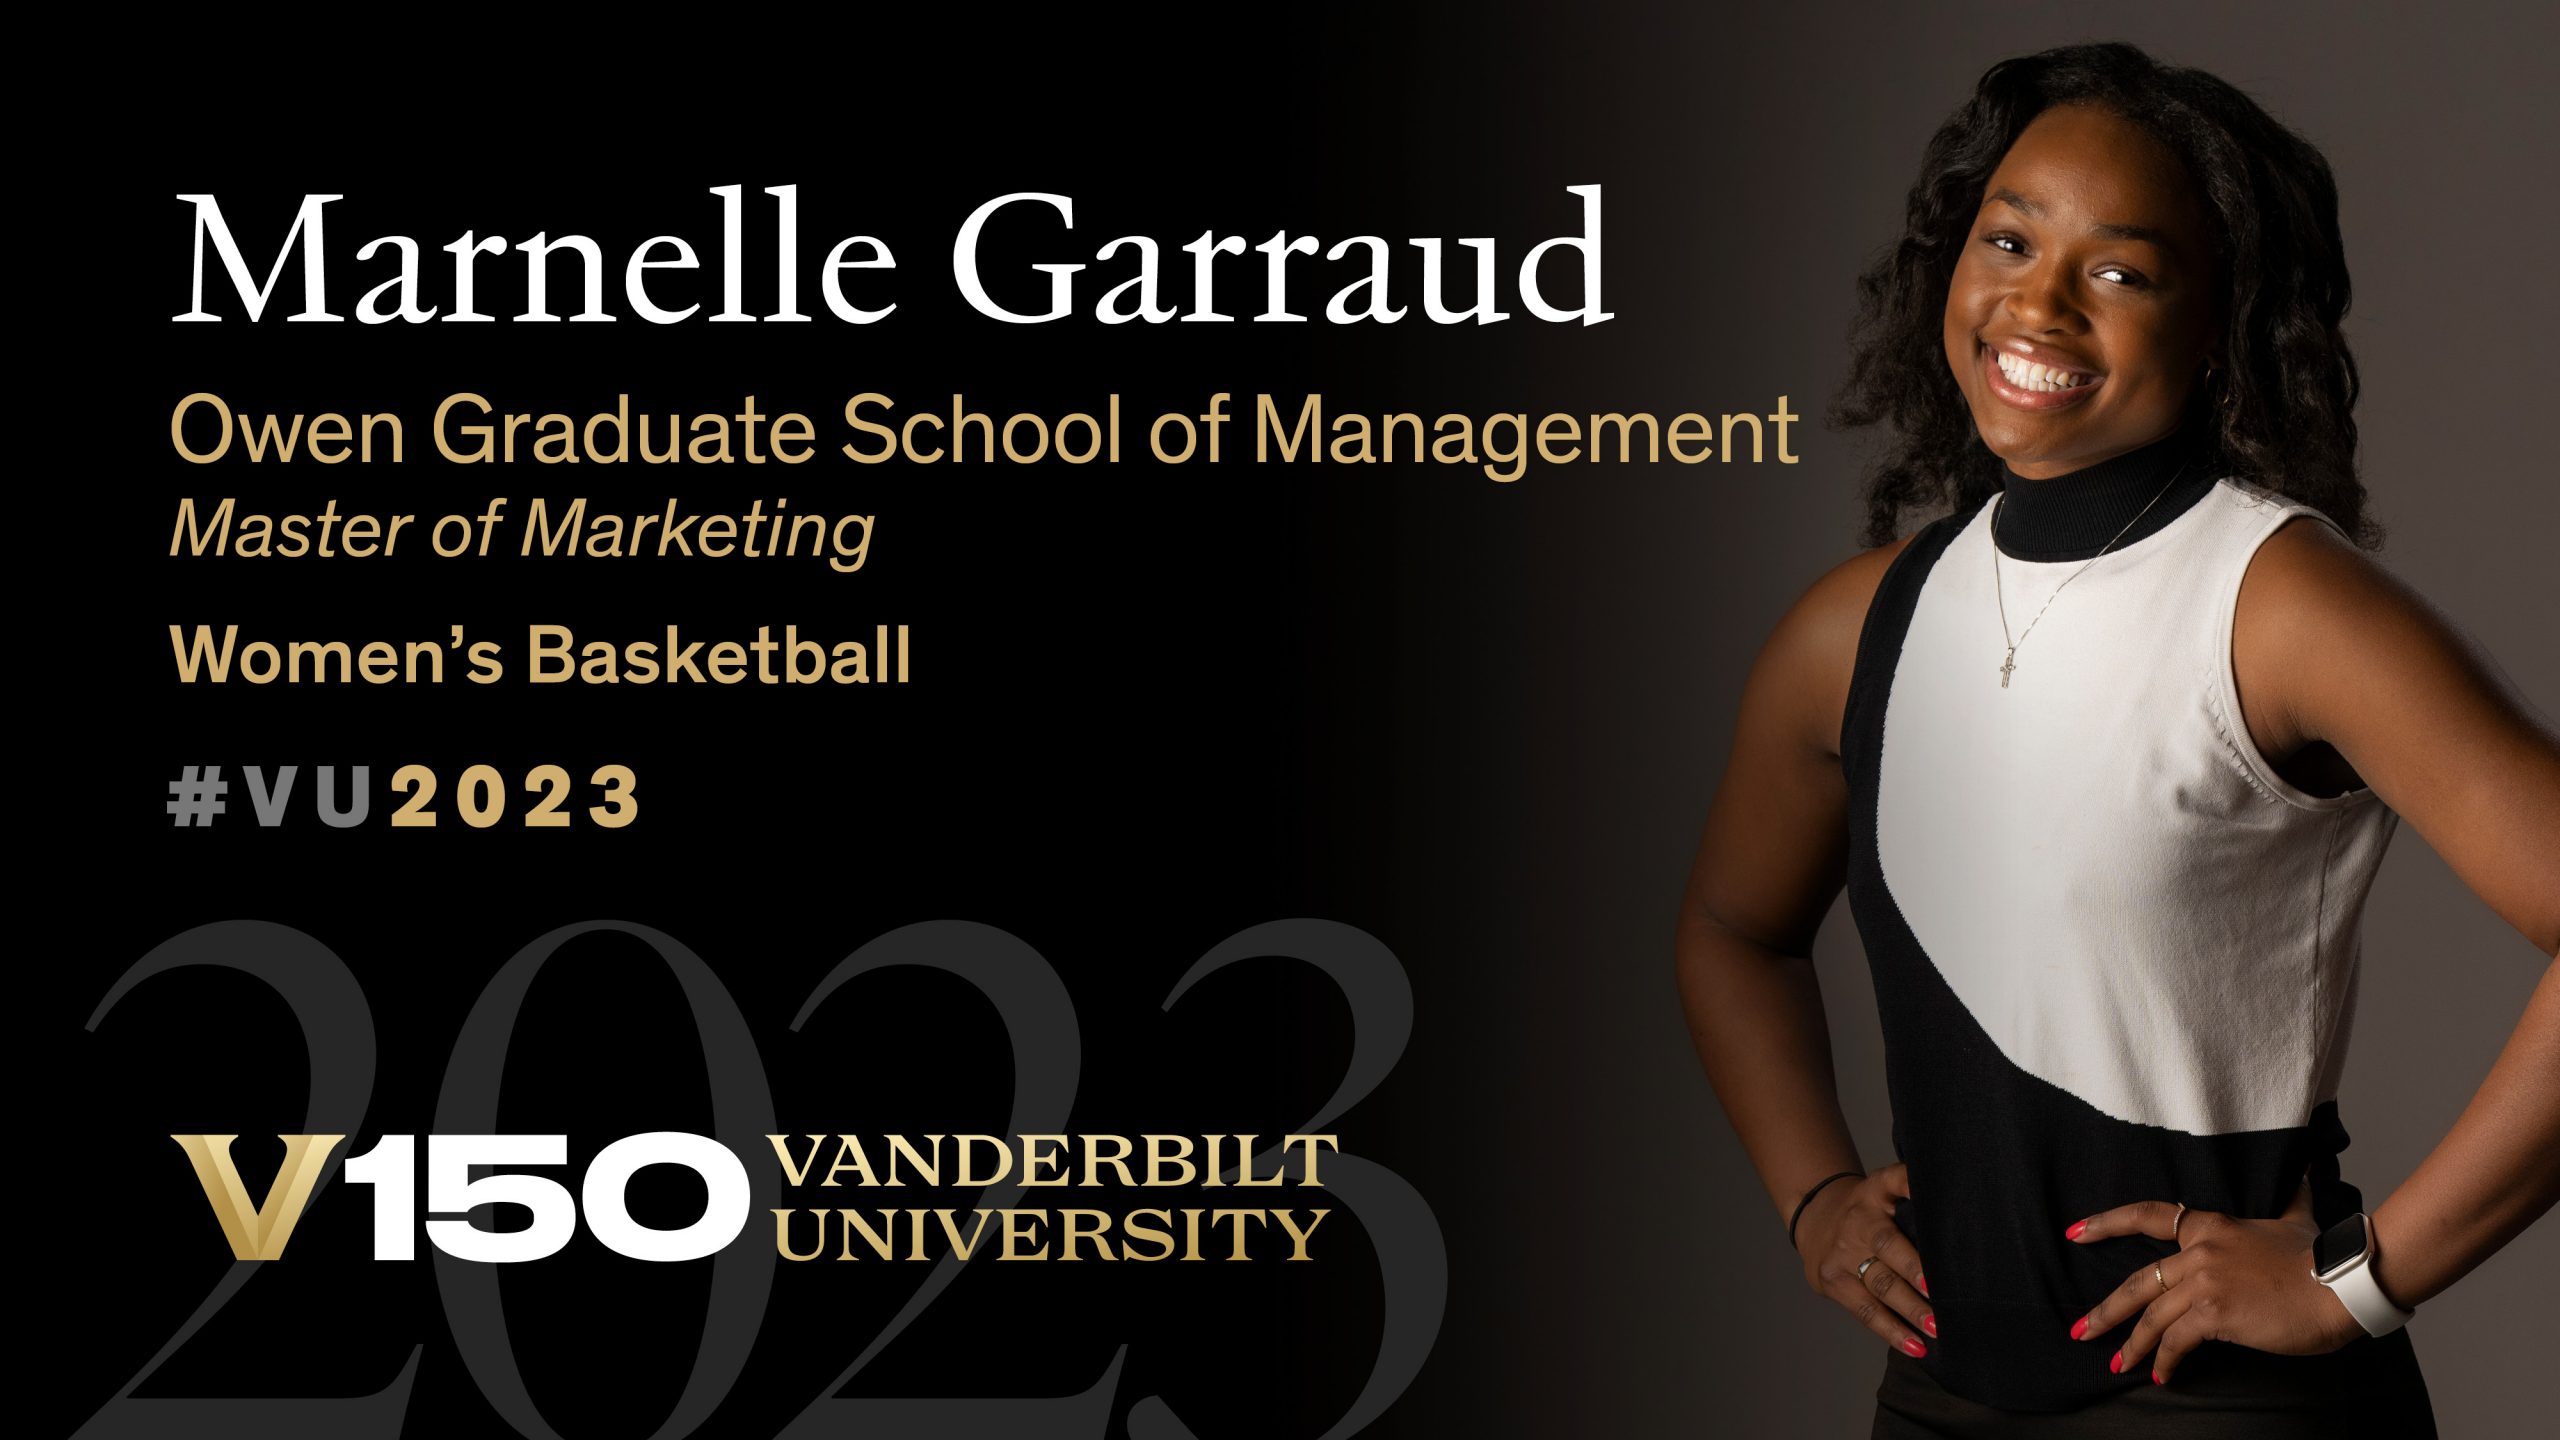 Class of 2023: Women’s basketball student-athlete Marnelle Garraud turned transfer opportunity into a lifelong connection with Vanderbilt